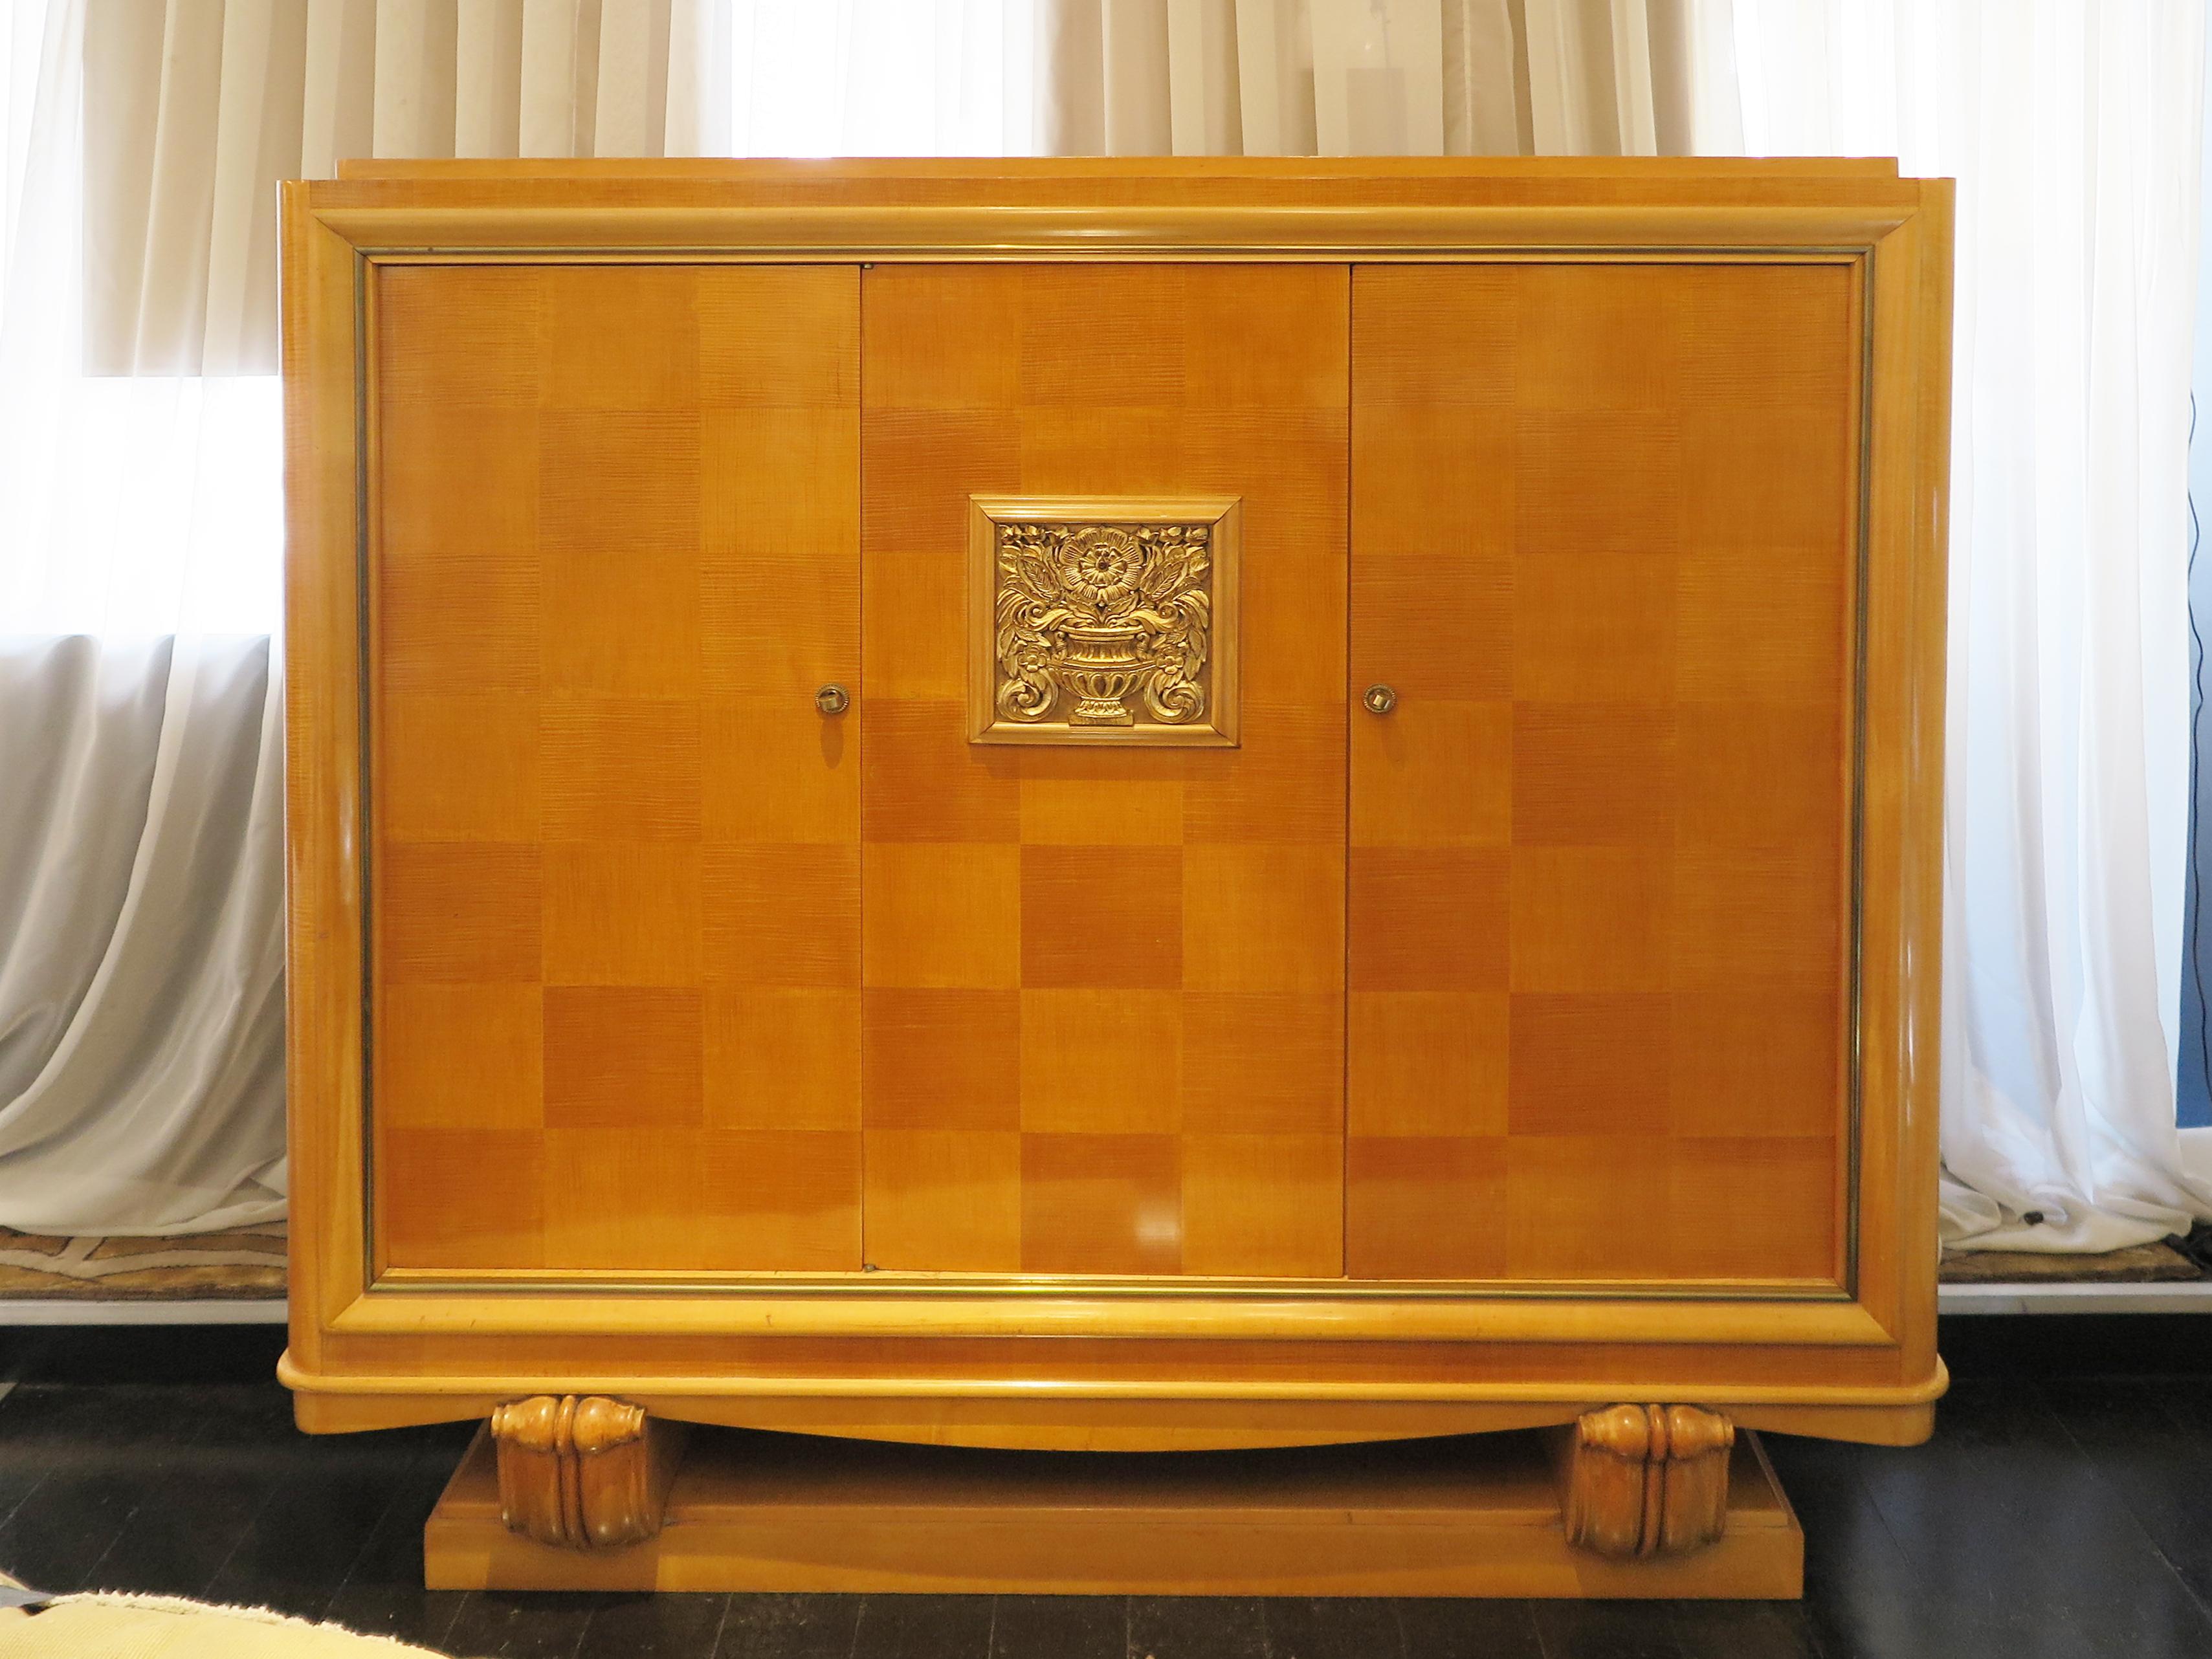 French Art Deco grande Sycamore cabinet attributed to Jean Desnos with floral bas relief detail in gold leaf on center panel.  The cabinet doors showcase a stunning parquetry pattern with a gold leaf detail around the border.   The base features two